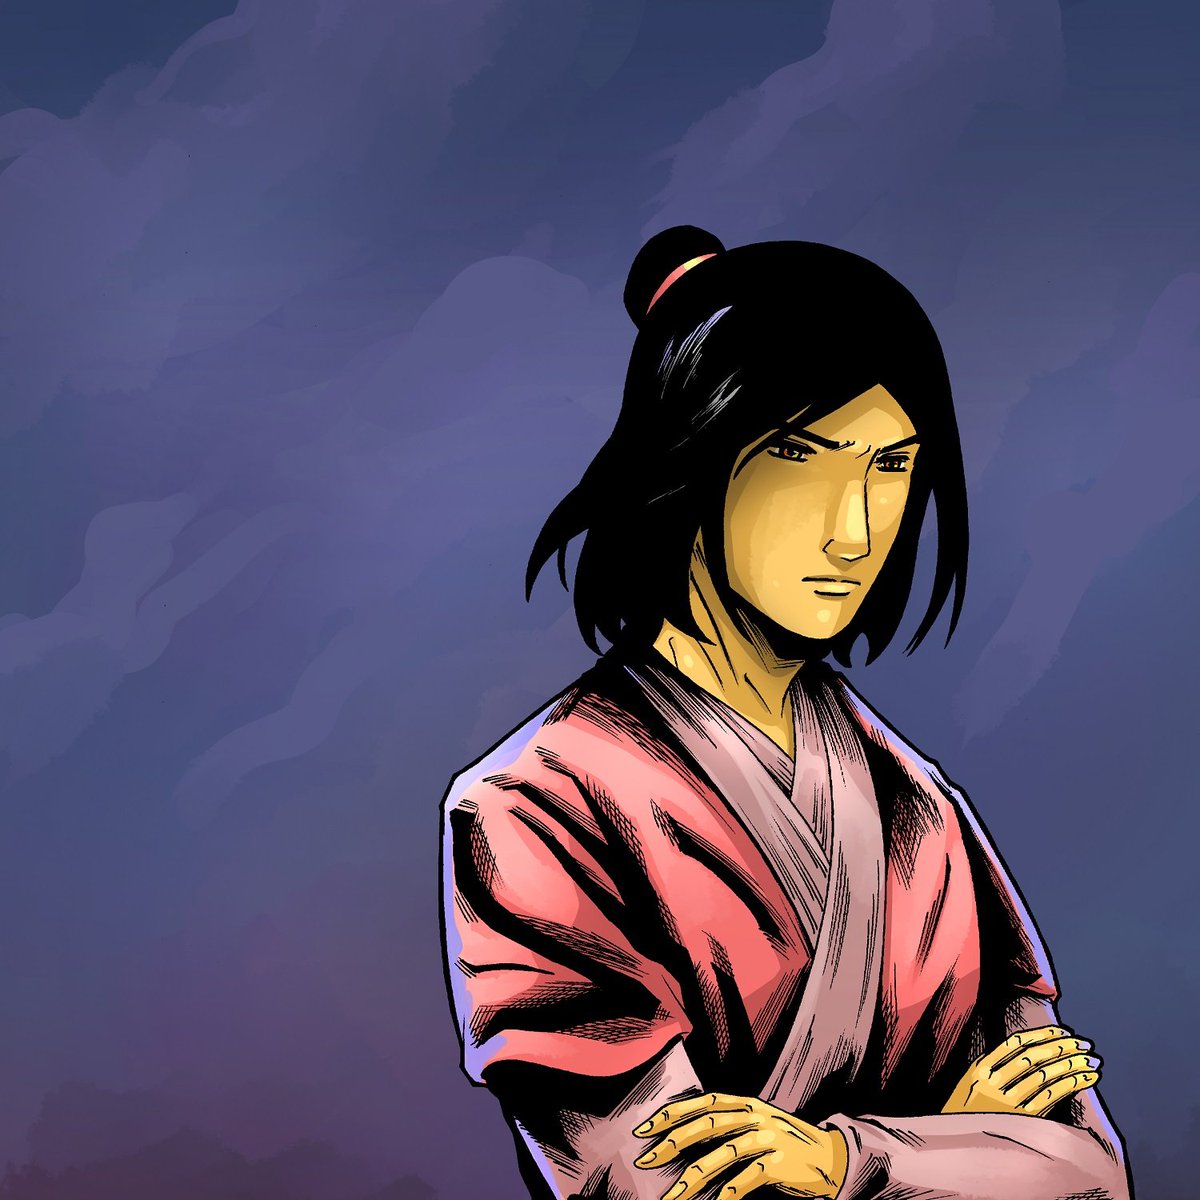 We are left with just TEN days on the Kickstarter campaign and we are getting really close to the goal! Come join us and grab a copy of ZHAO vol 1!

kickstarter.com/projects/chira…
--------------------
#wuxia #comic #comics #graphicnovel #comicbook #kickstartercomic #Kickstarter